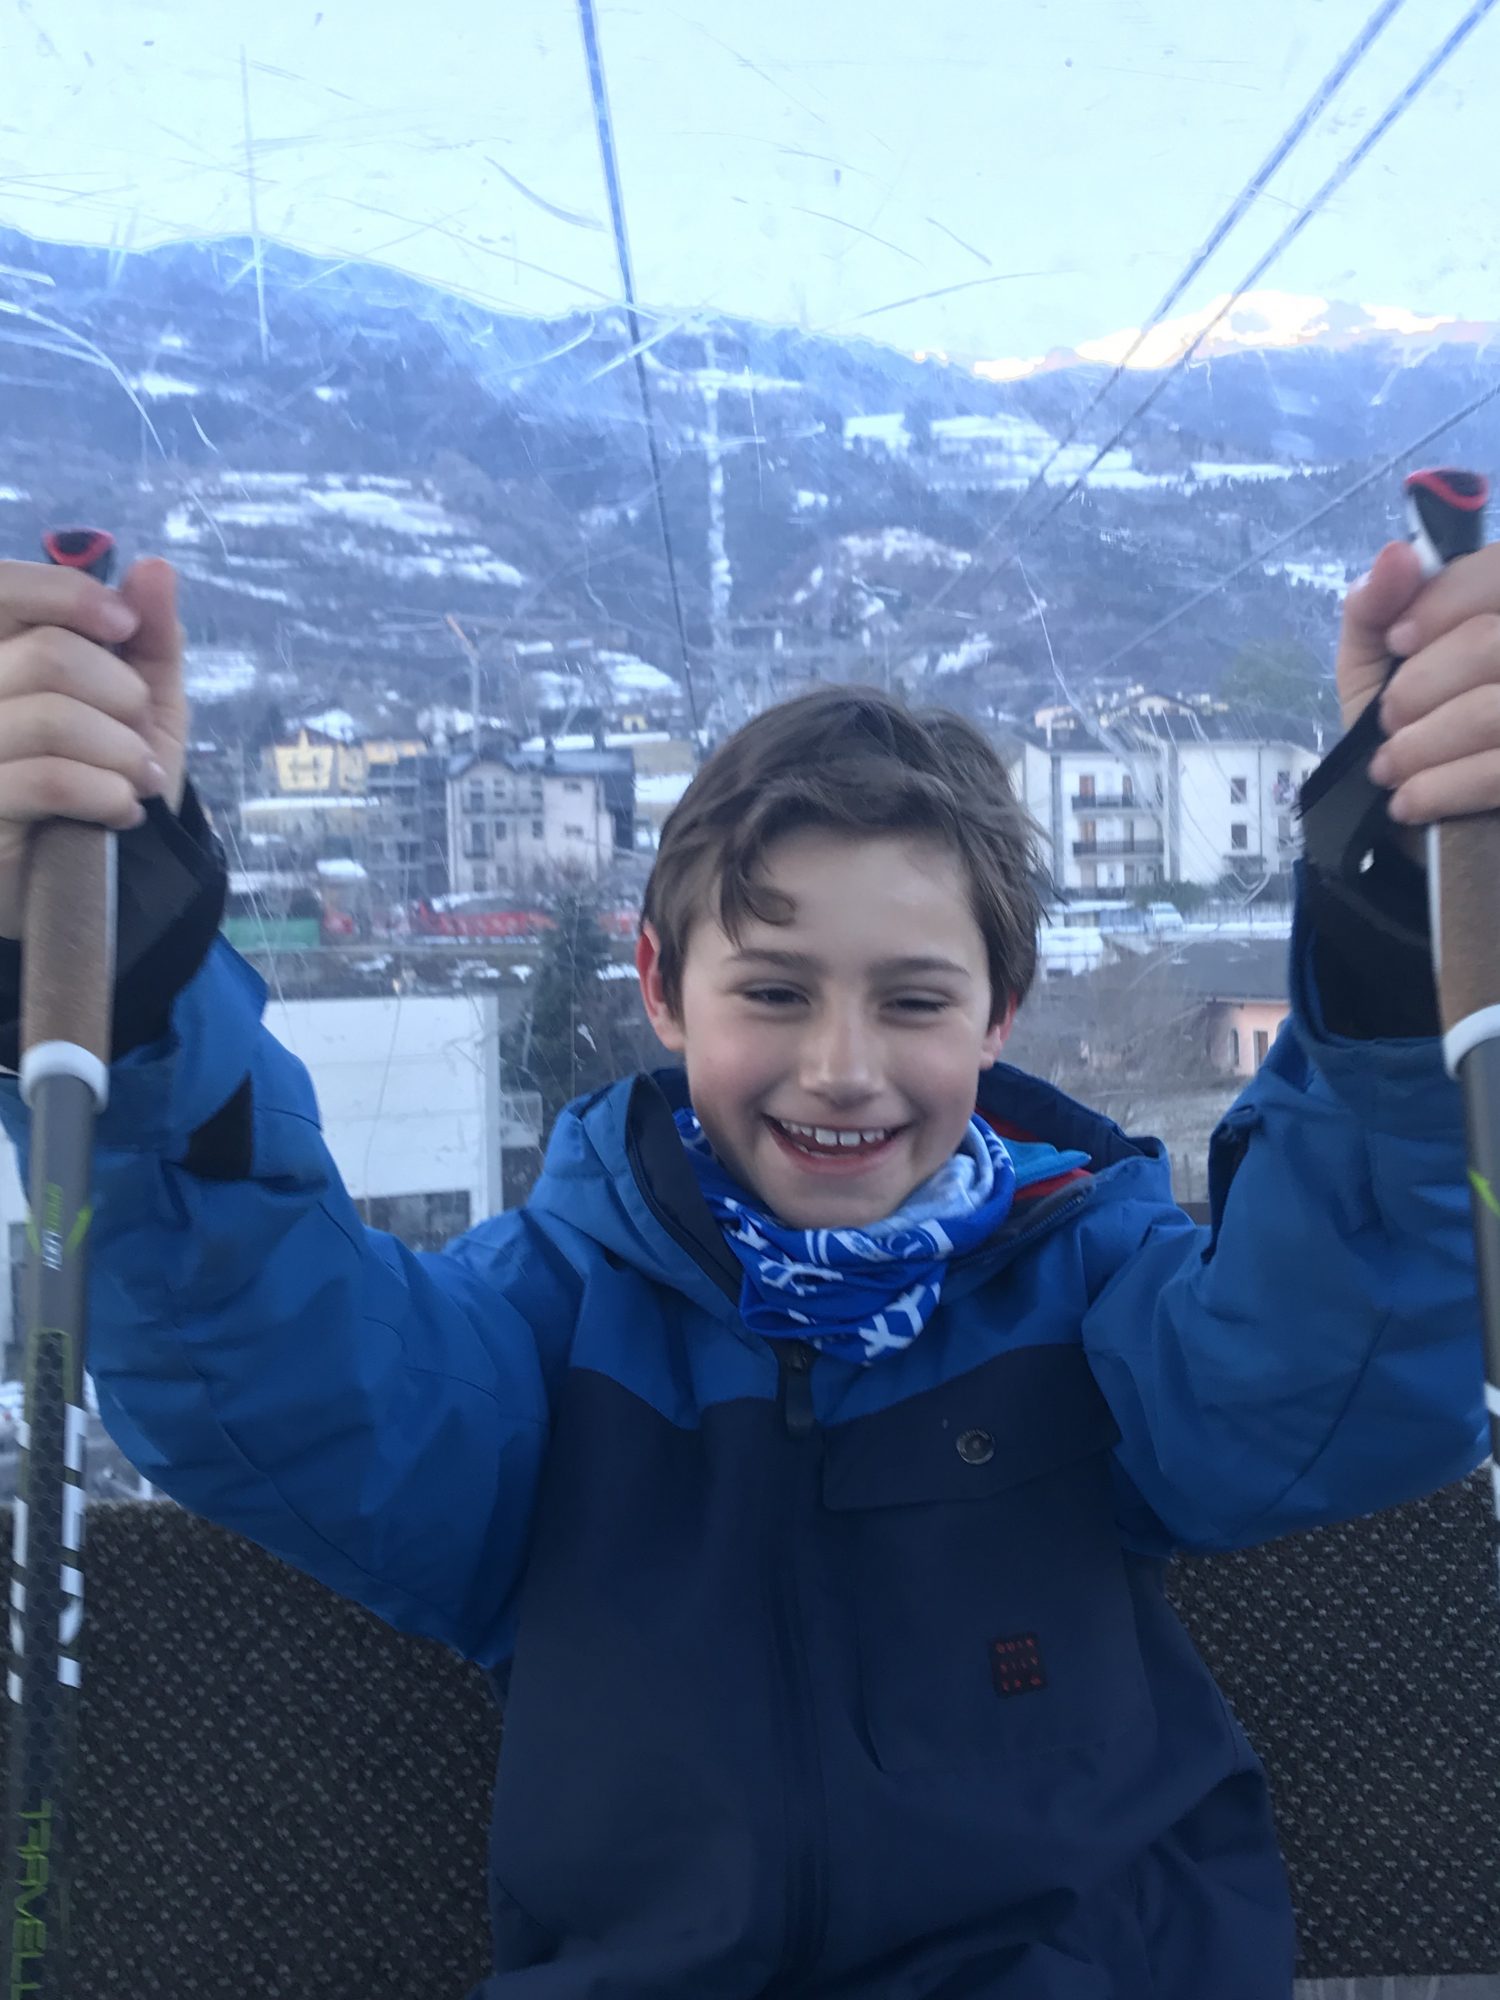 A happy boy in the snow! Photo: The-Ski-Guru. The Half Term Family Ski Holiday that did not result as planned.